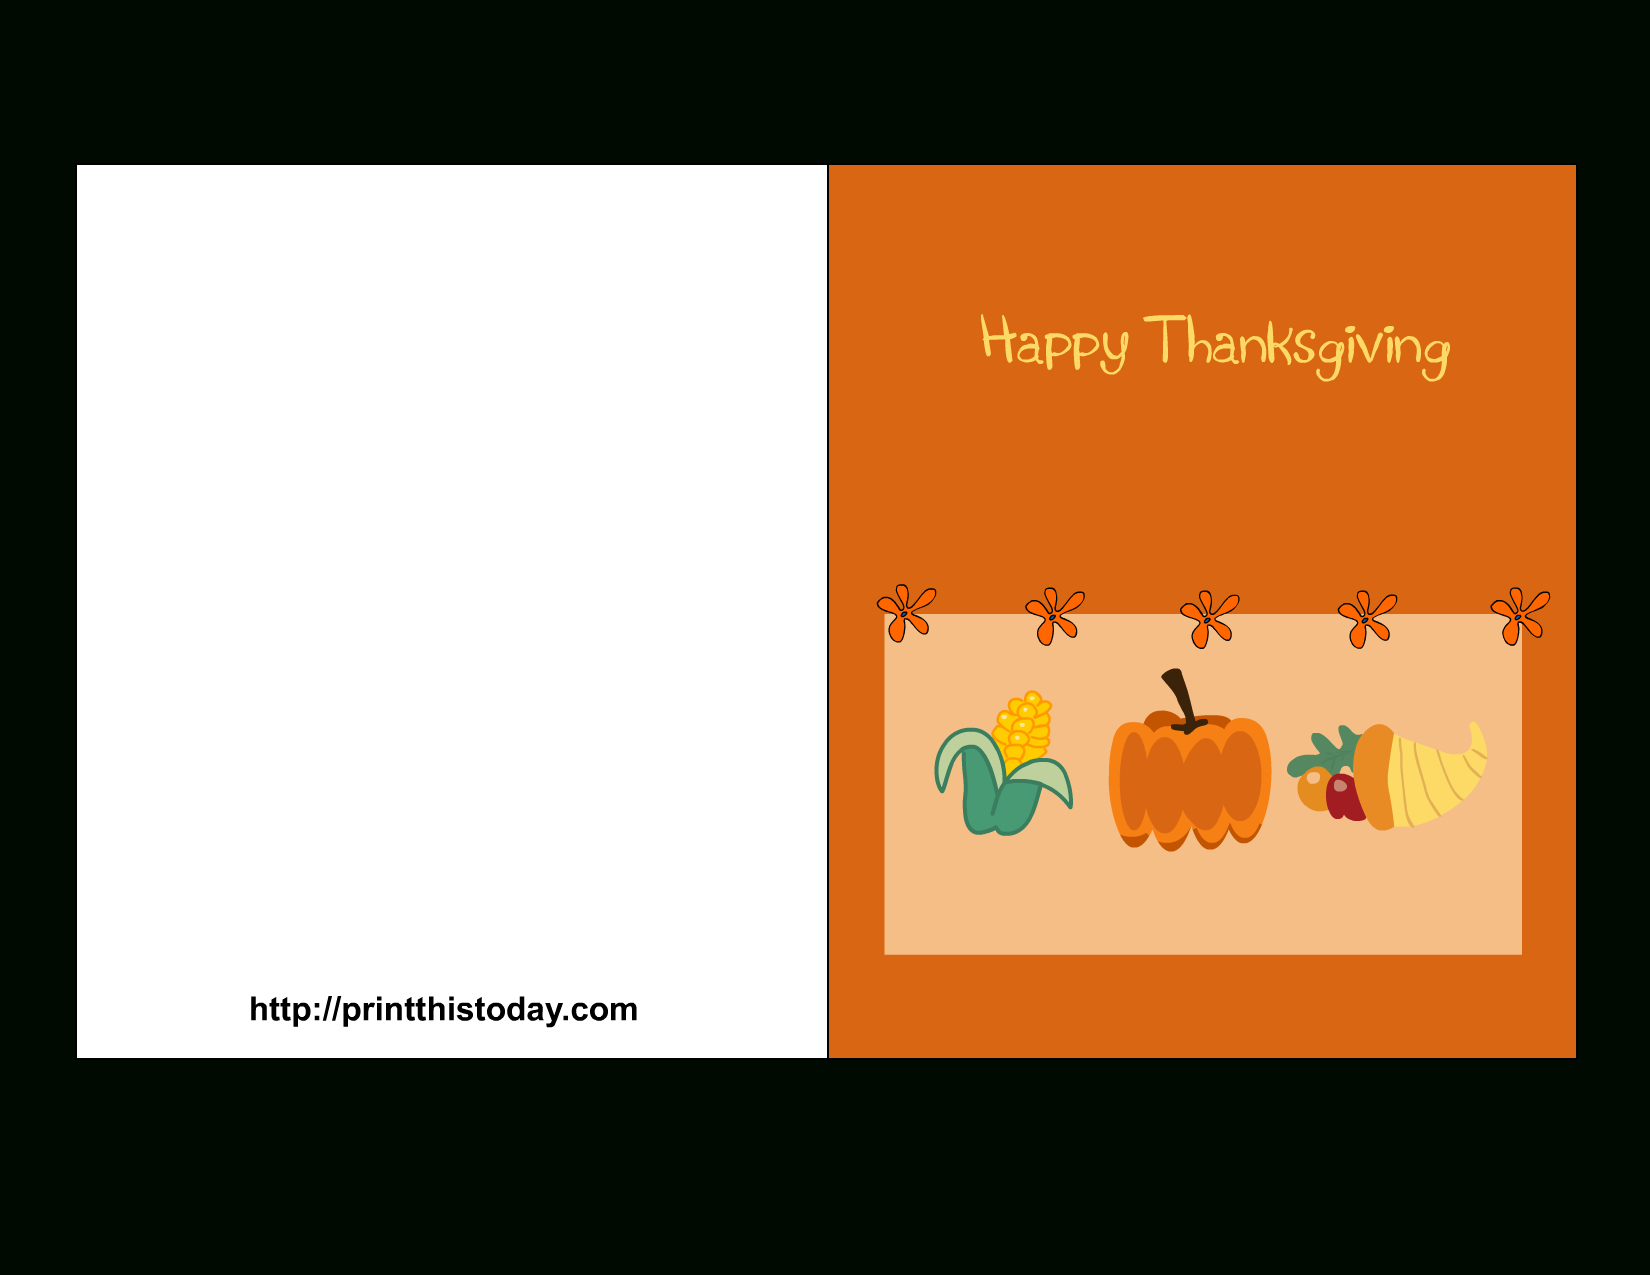 Free Printable Thanksgiving Cards - Happy Thanksgiving Cards Free Printable